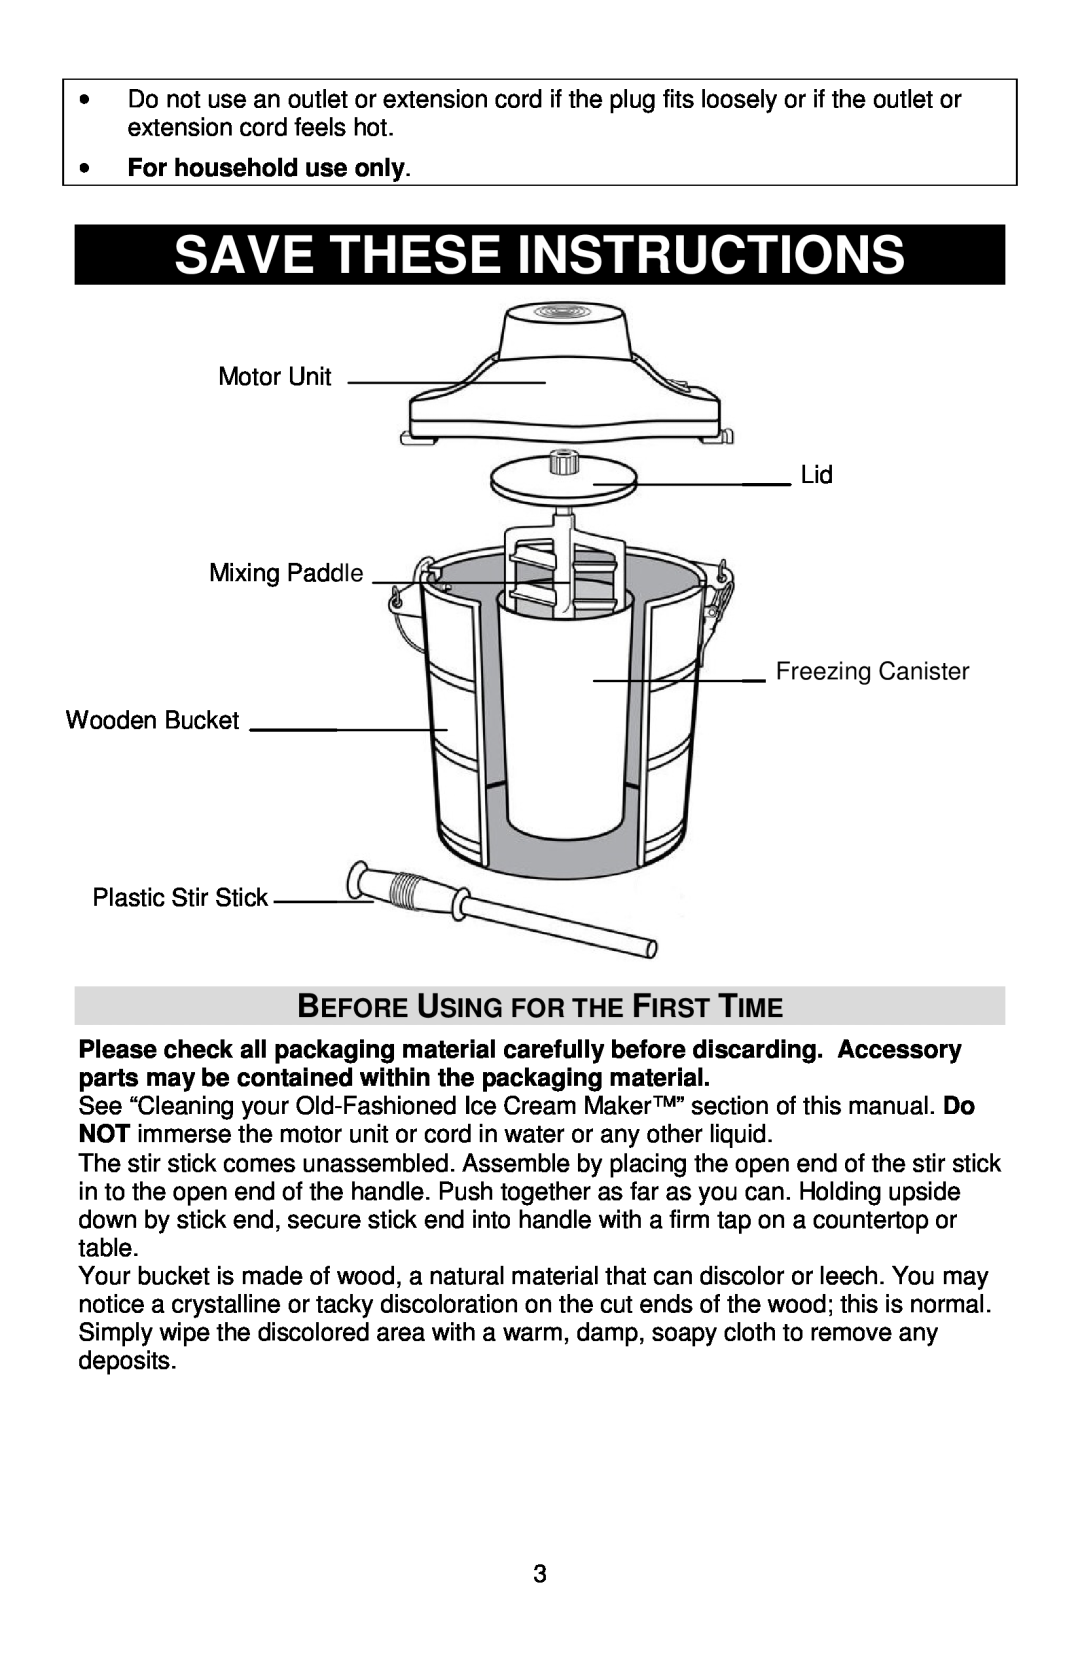 West Bend IC12701 instruction manual Save These Instructions, Before Using For The First Time, For household use only 